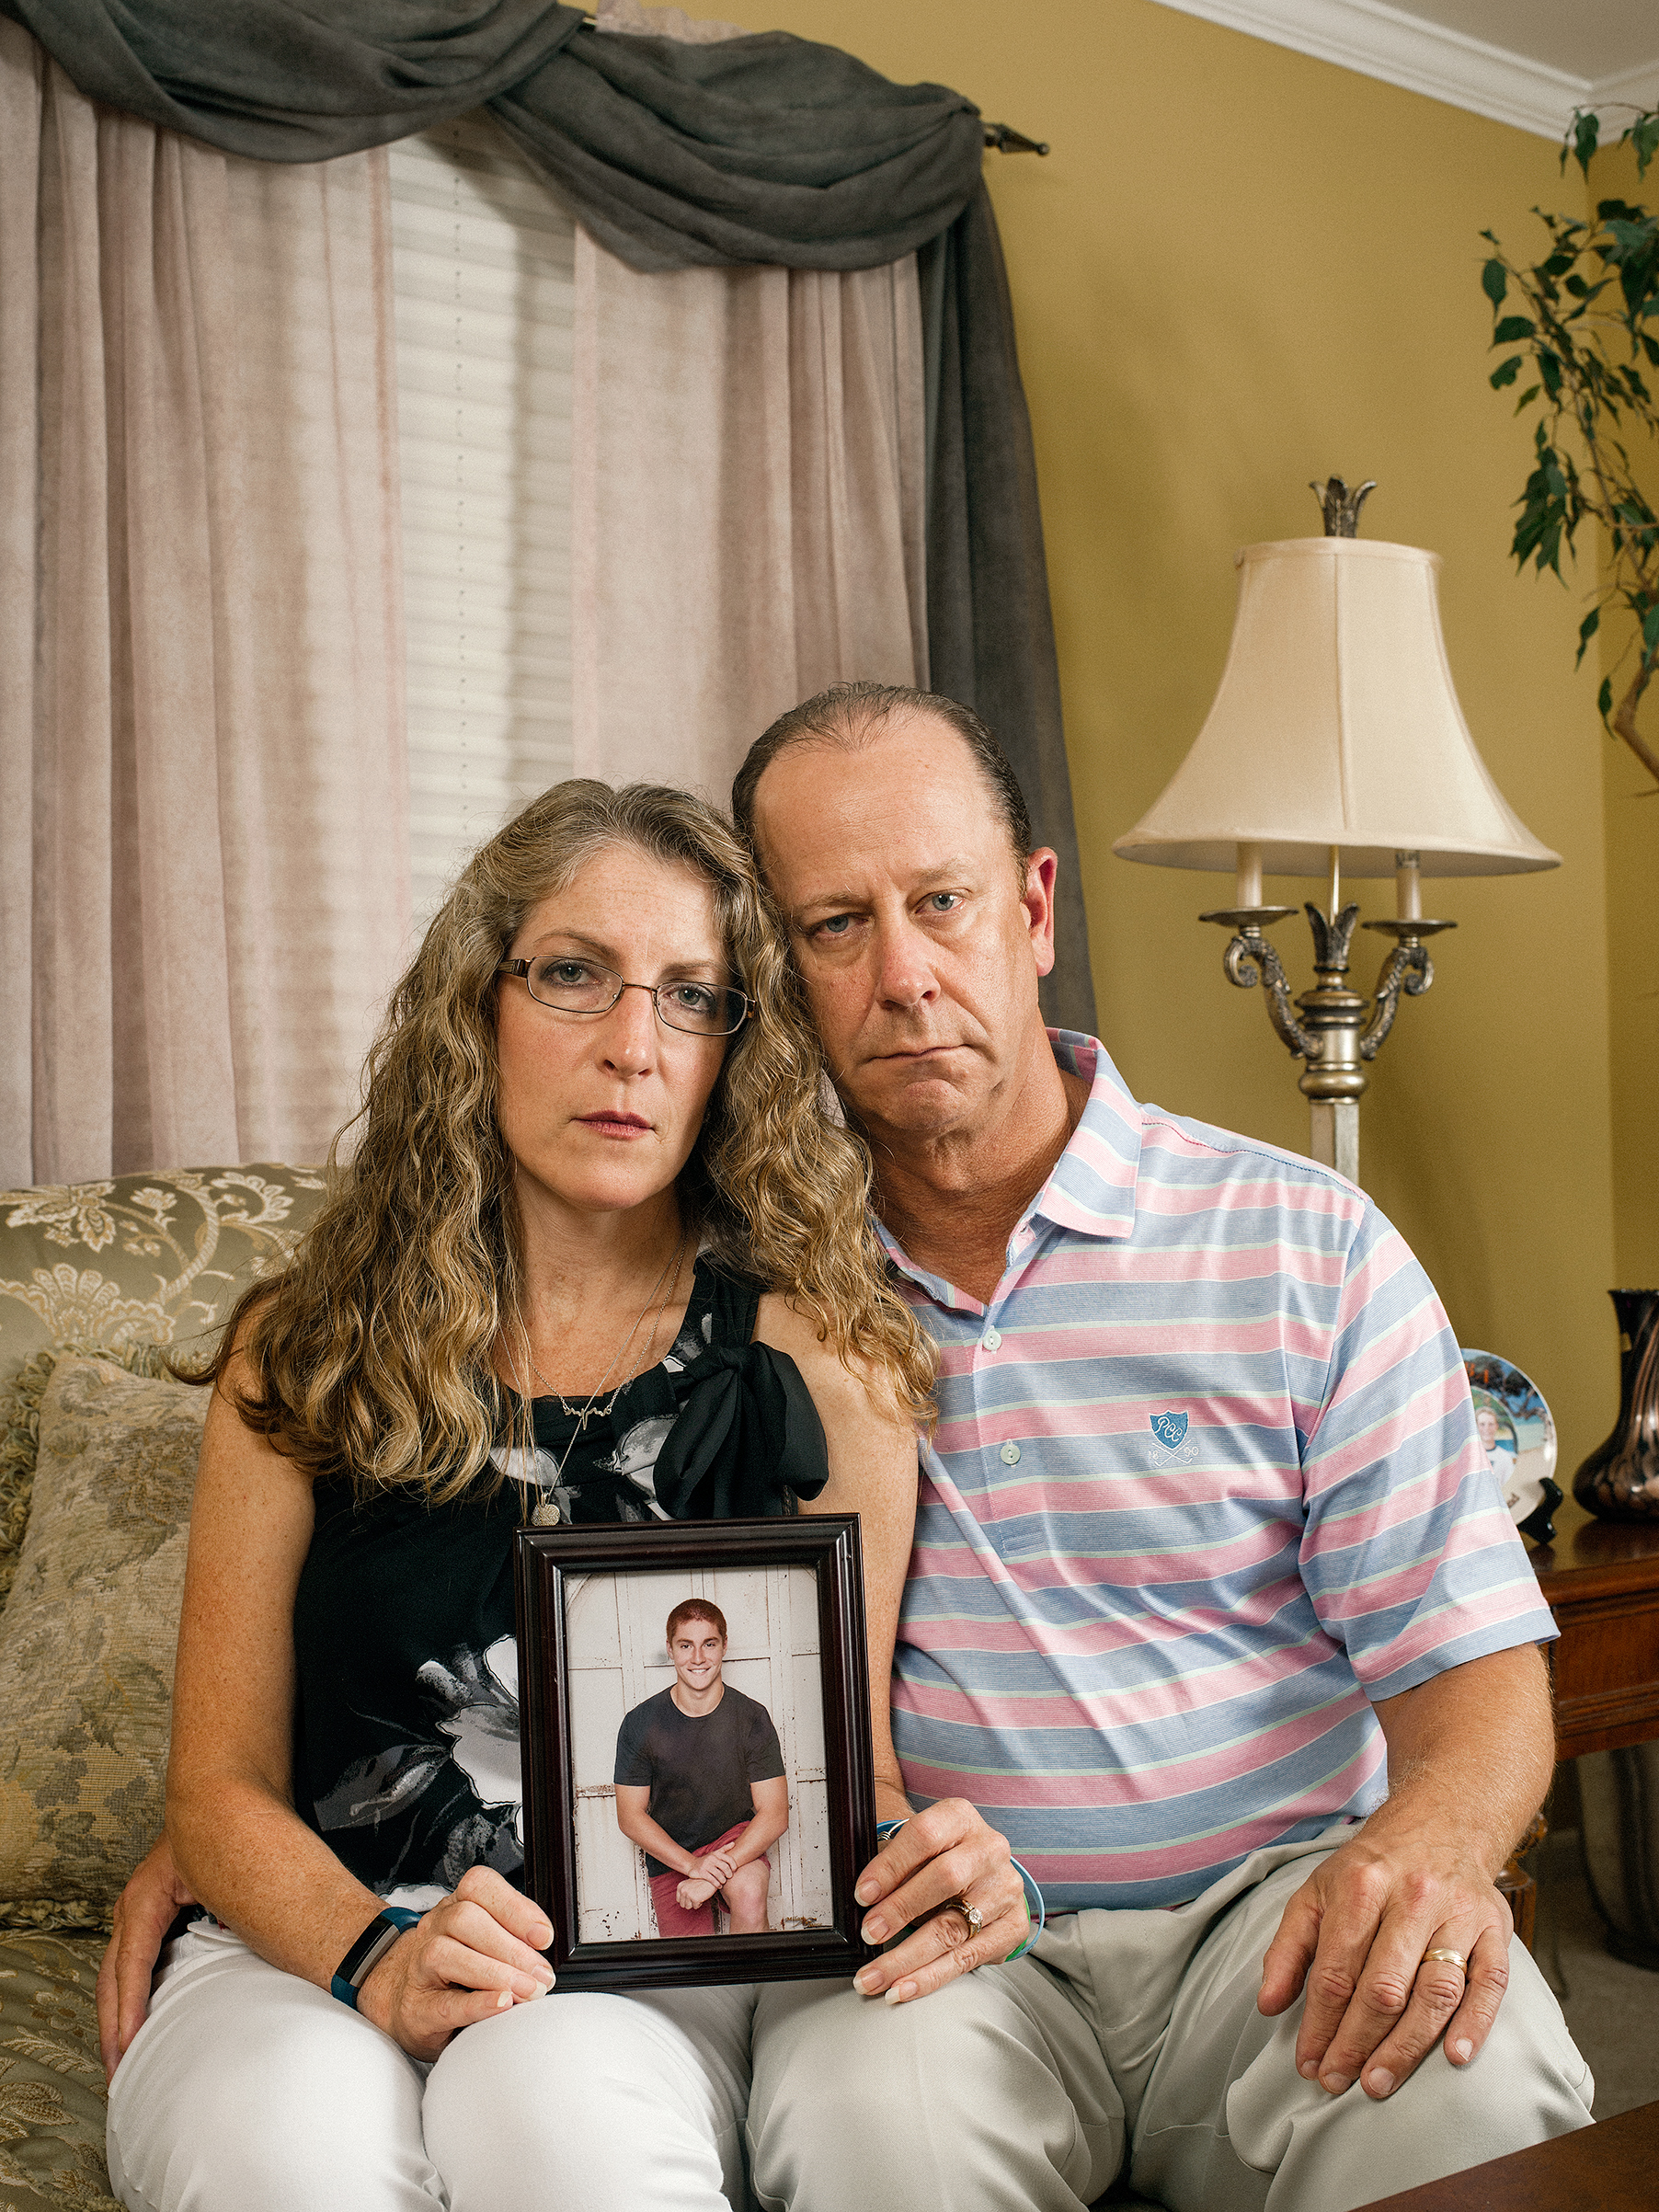 Evelyn and Jim Piazza with a photo of their son Tim, who died in February after a fraternity hazing ritual at Penn State University